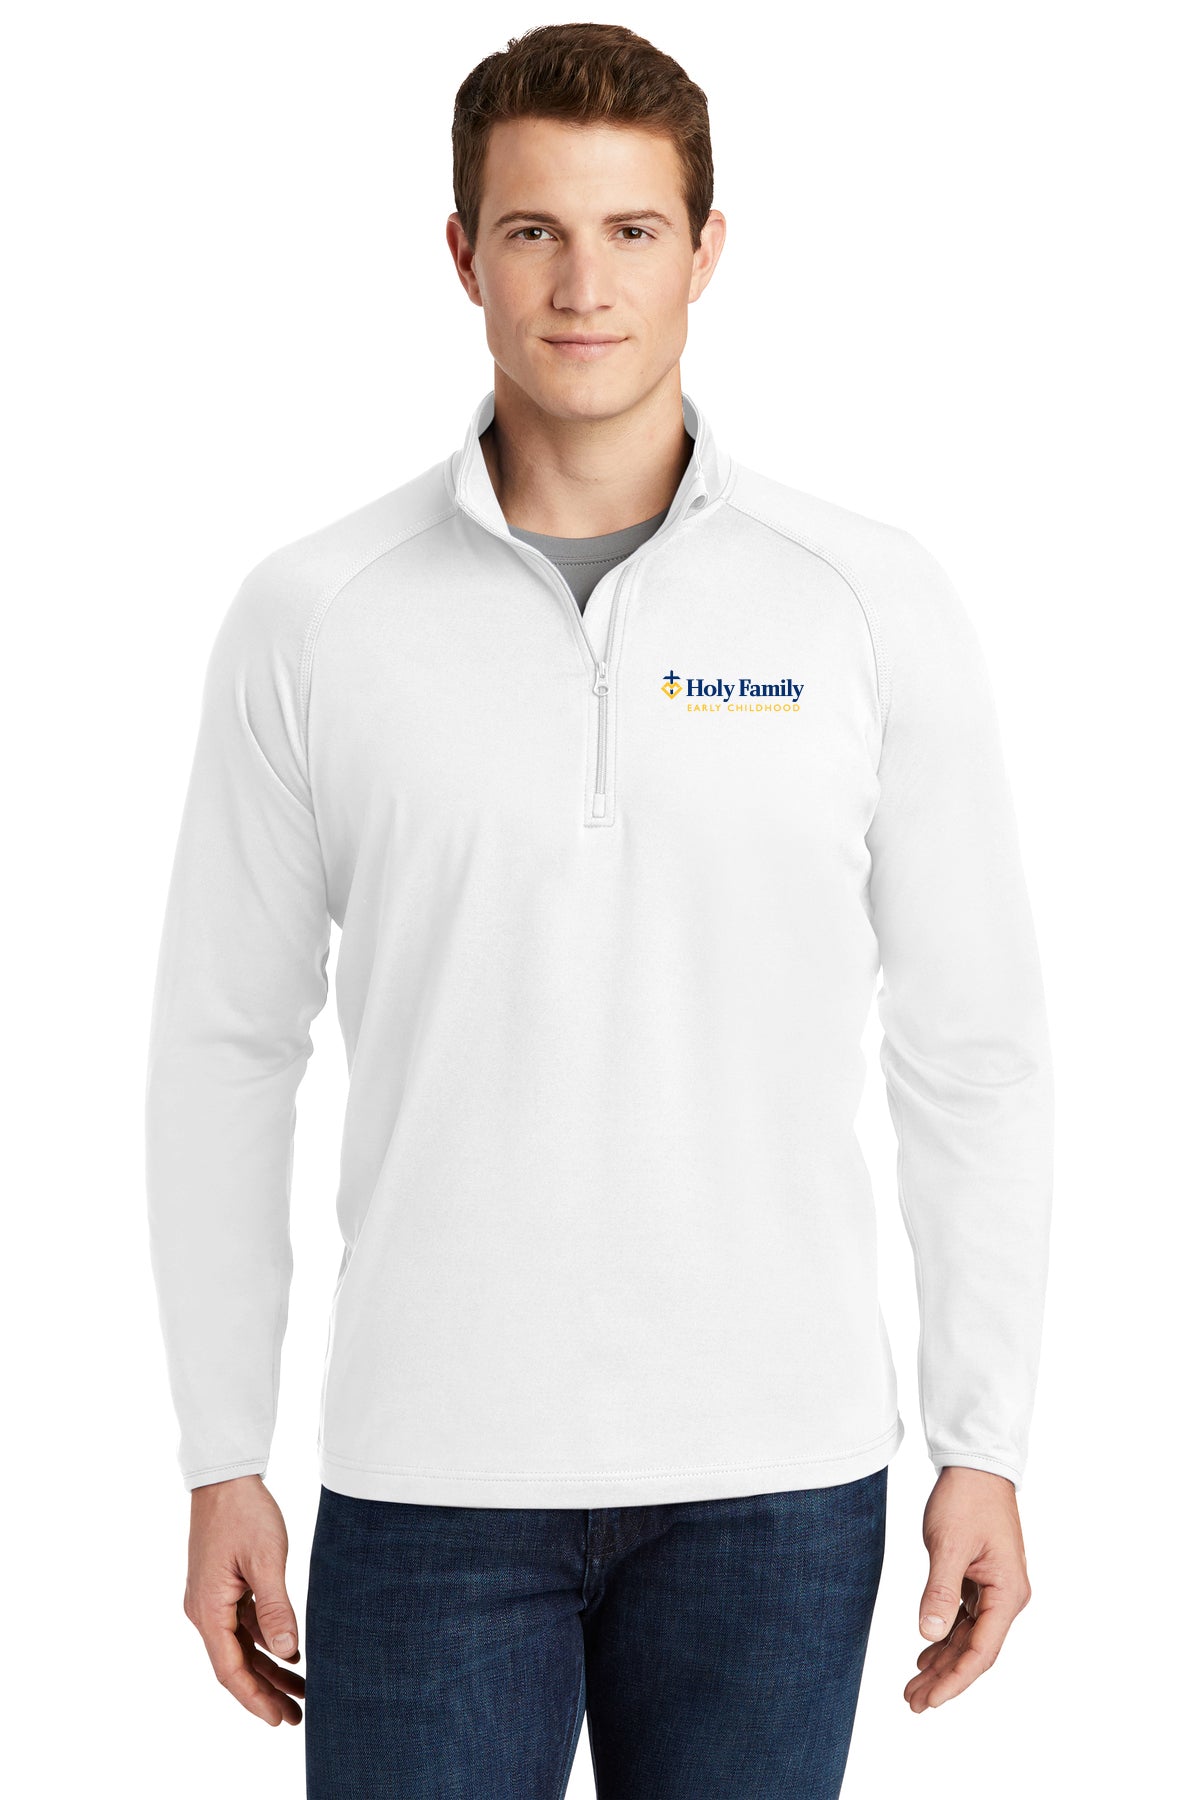 ST850 - HOLY FAMILY EARLY CHILDHOOD STAFF - Men’s Sport Wick Zip Pullover